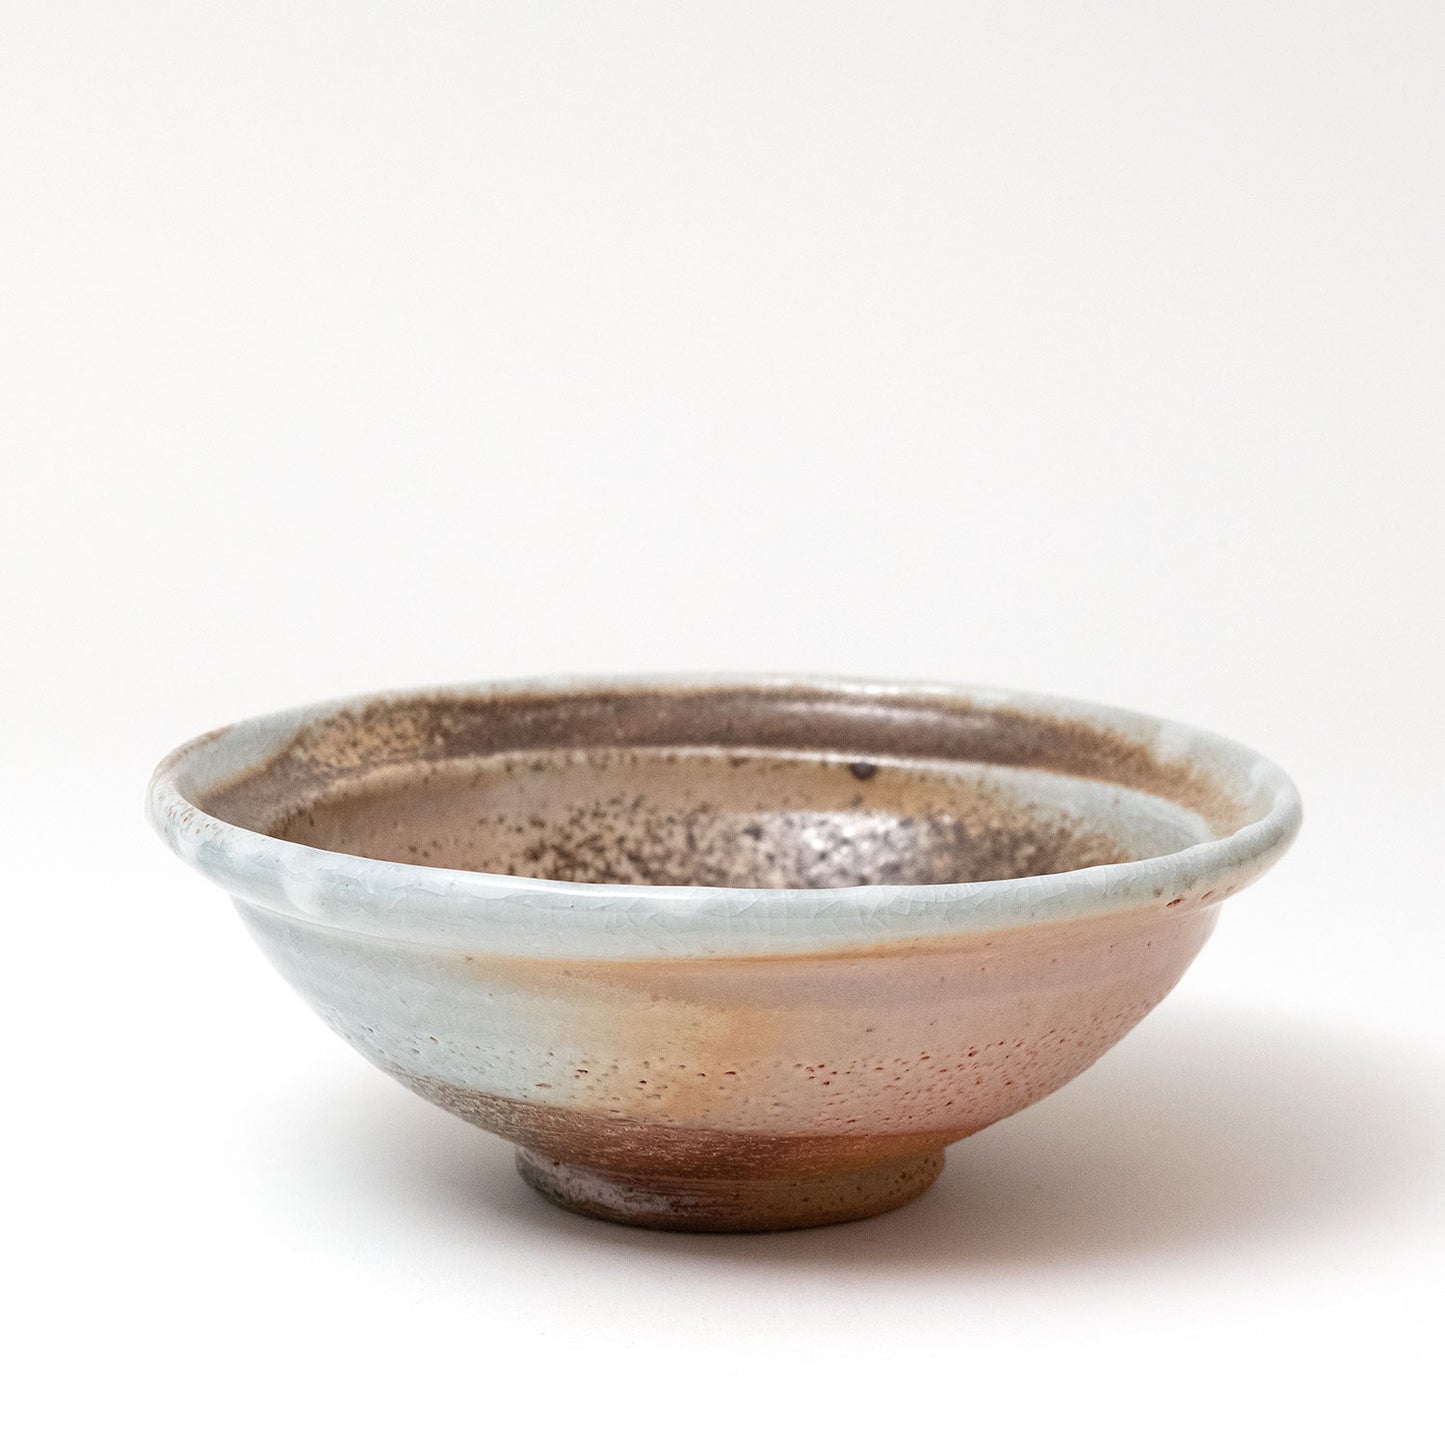 Small Bowl with Rim